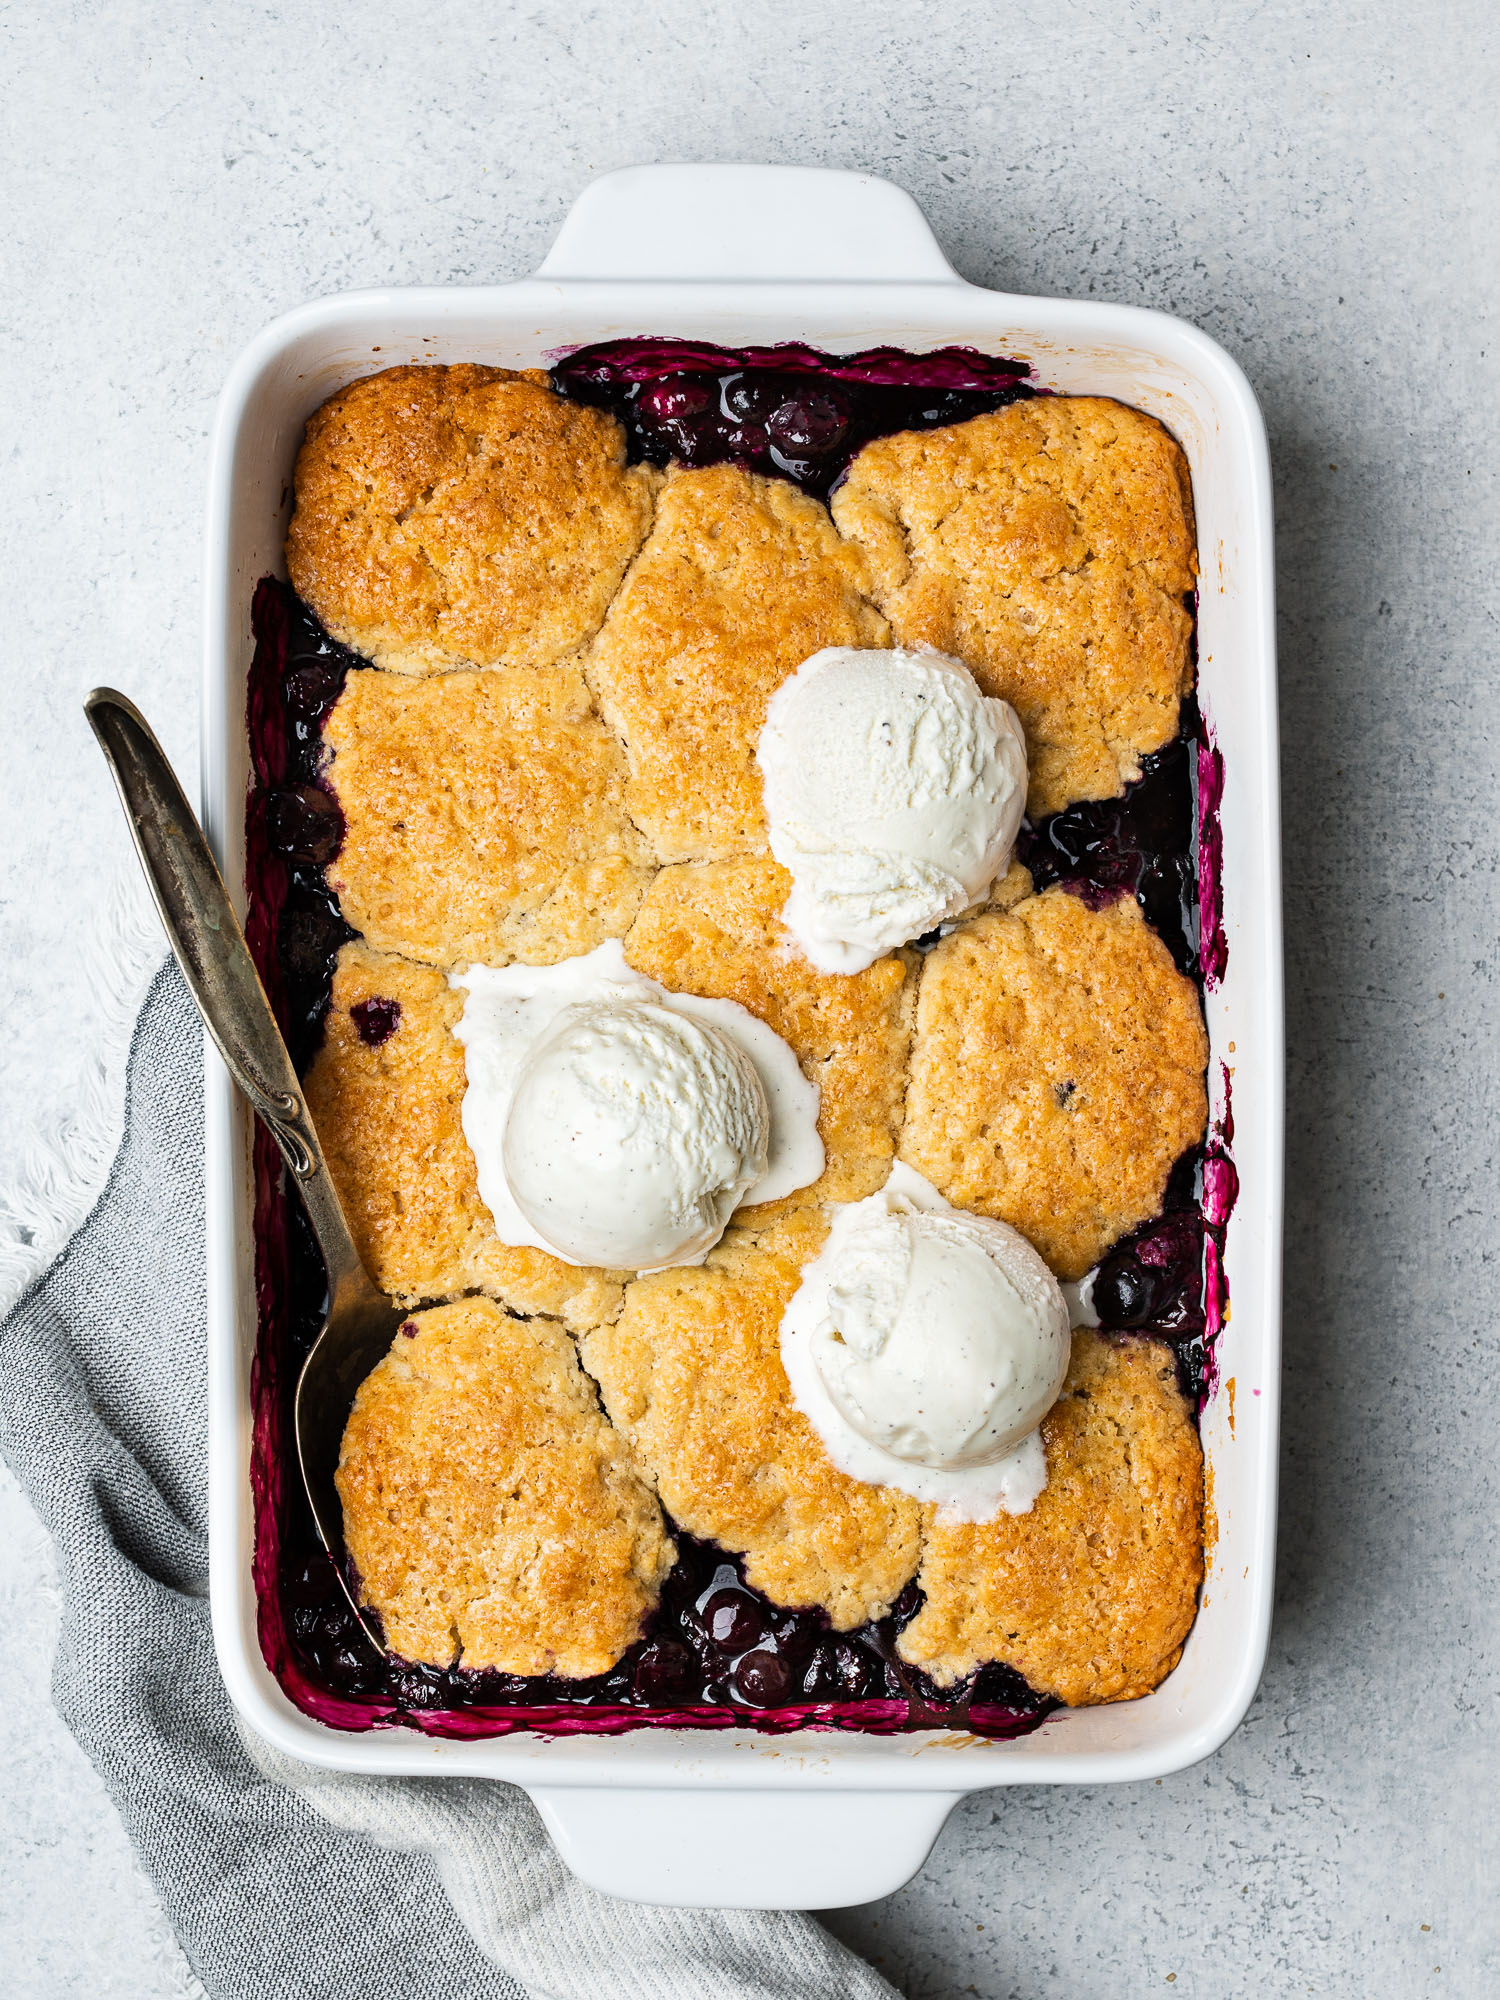 Blueberry cobbler in baking dish topped with 3 ice cream scoops